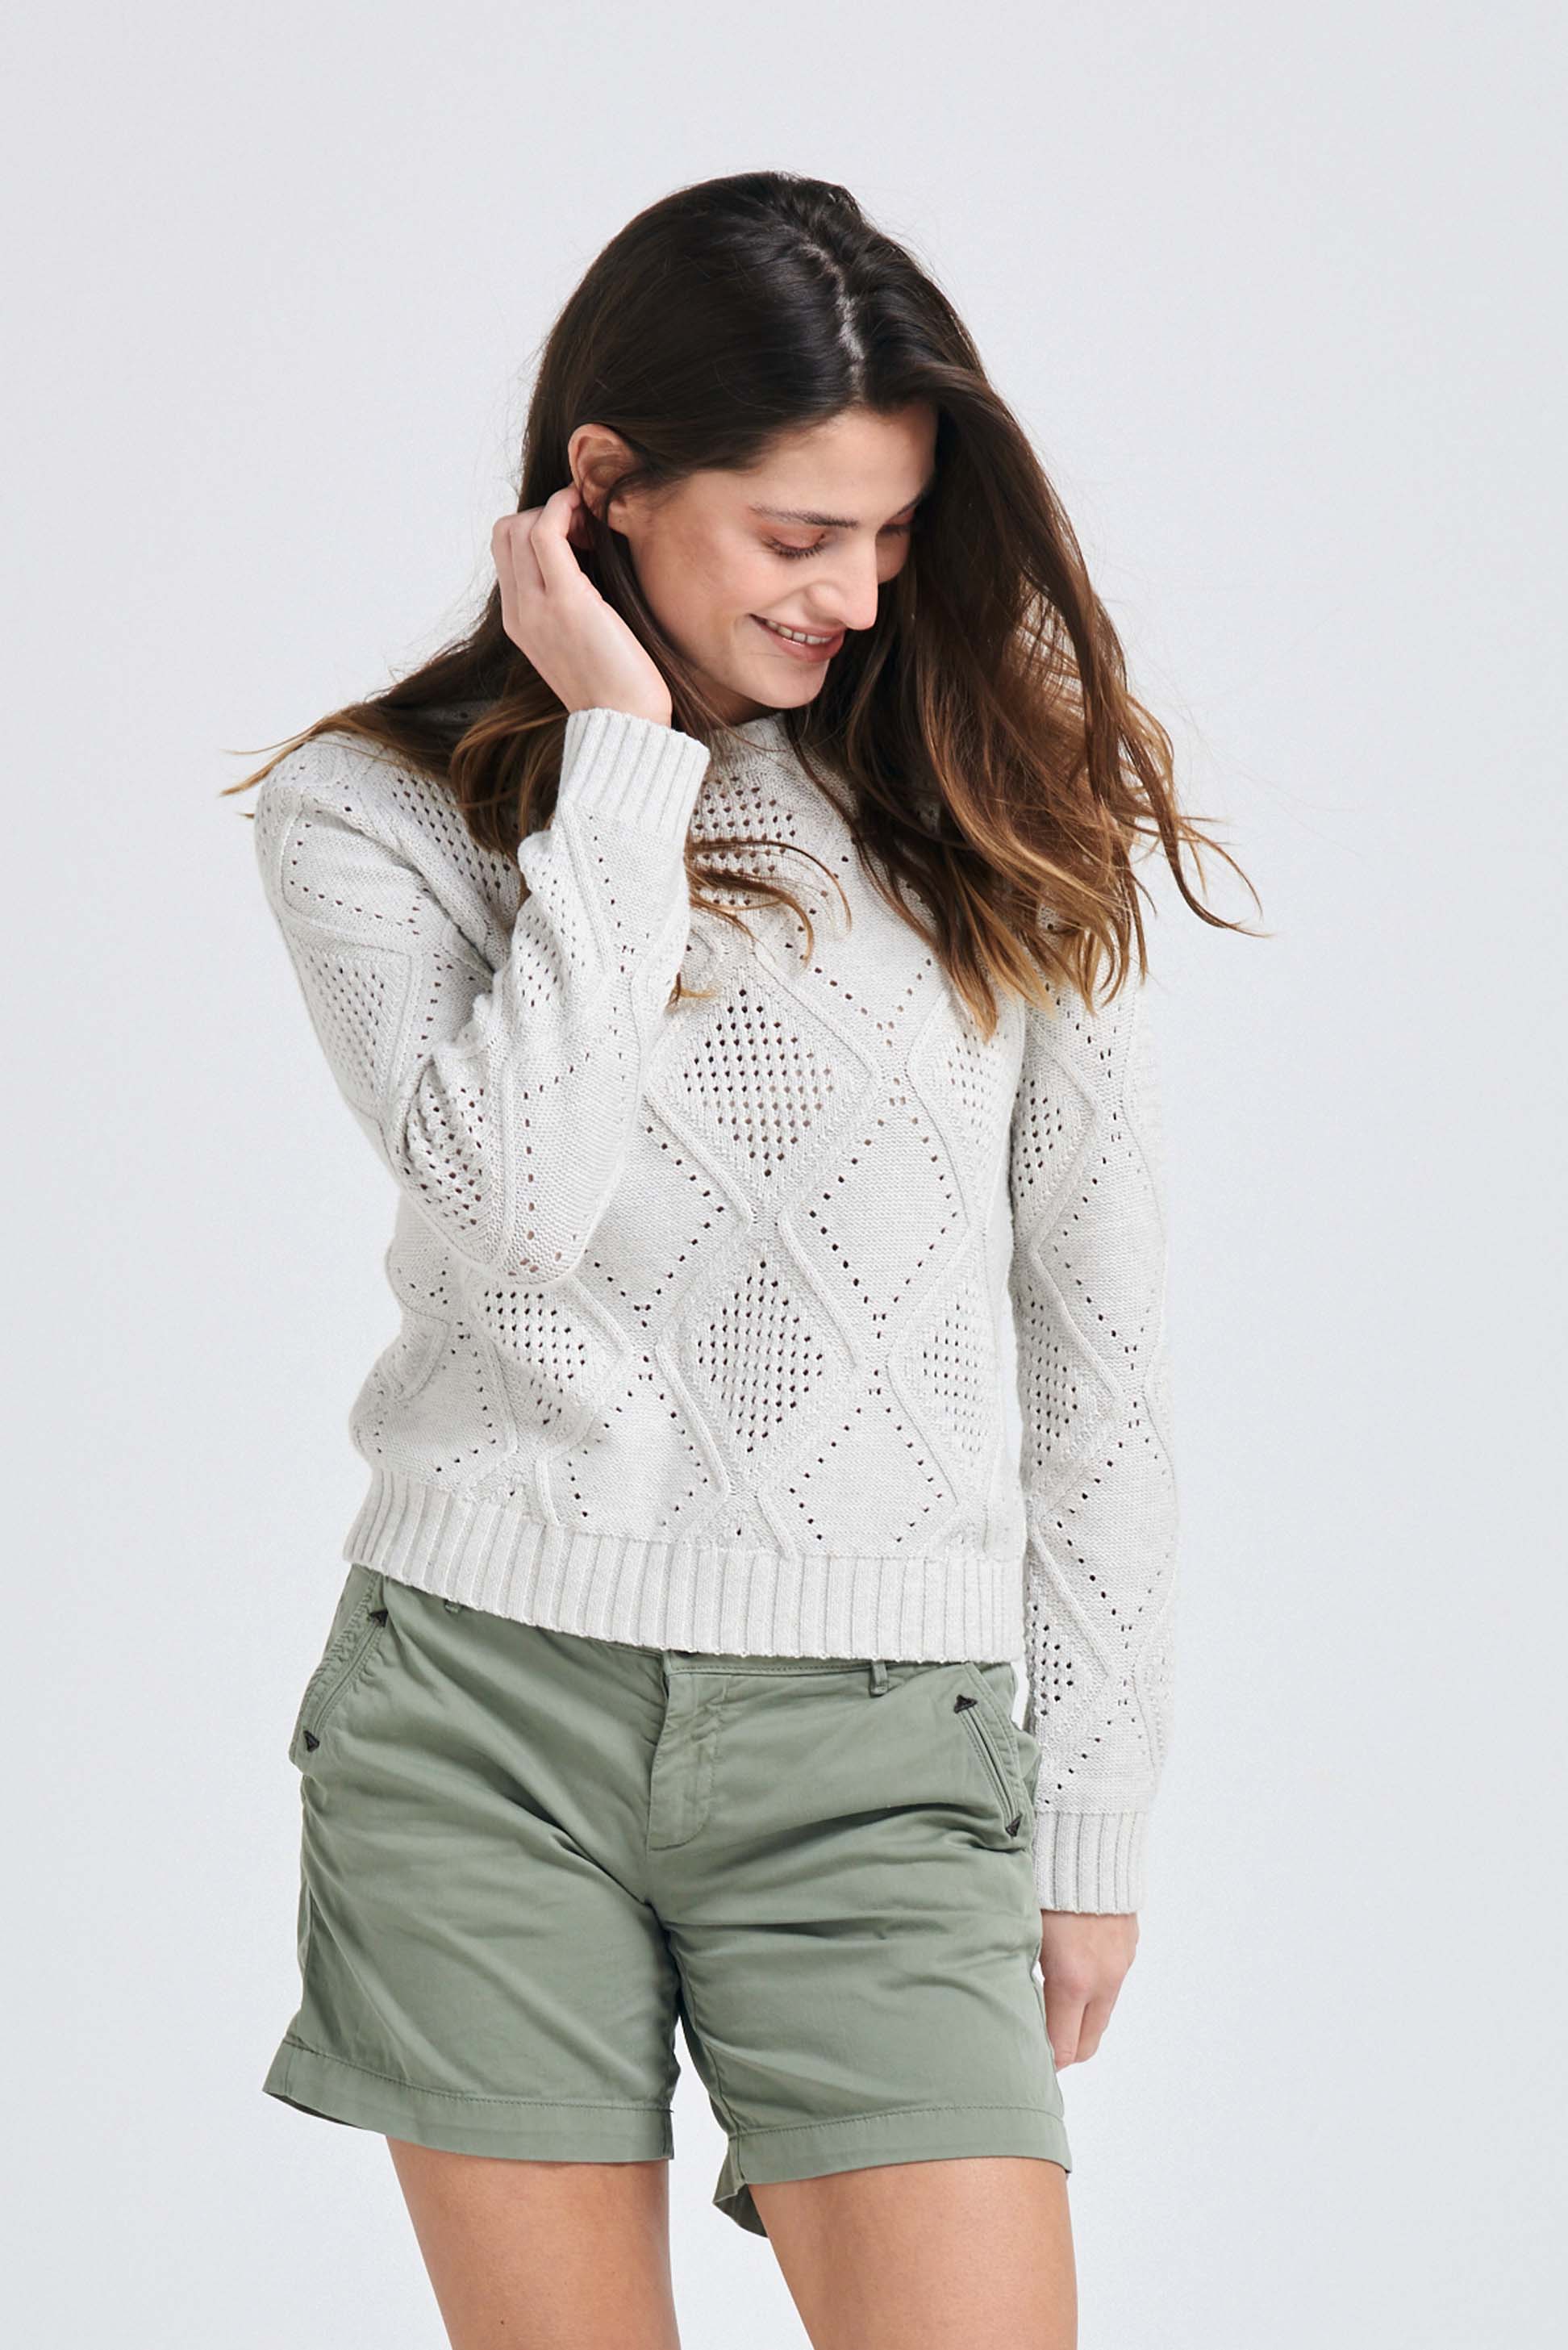 Brown haired female model wearing Jumper1234 Silver cotton crew neck jumper with a diamond texture stitch pattern